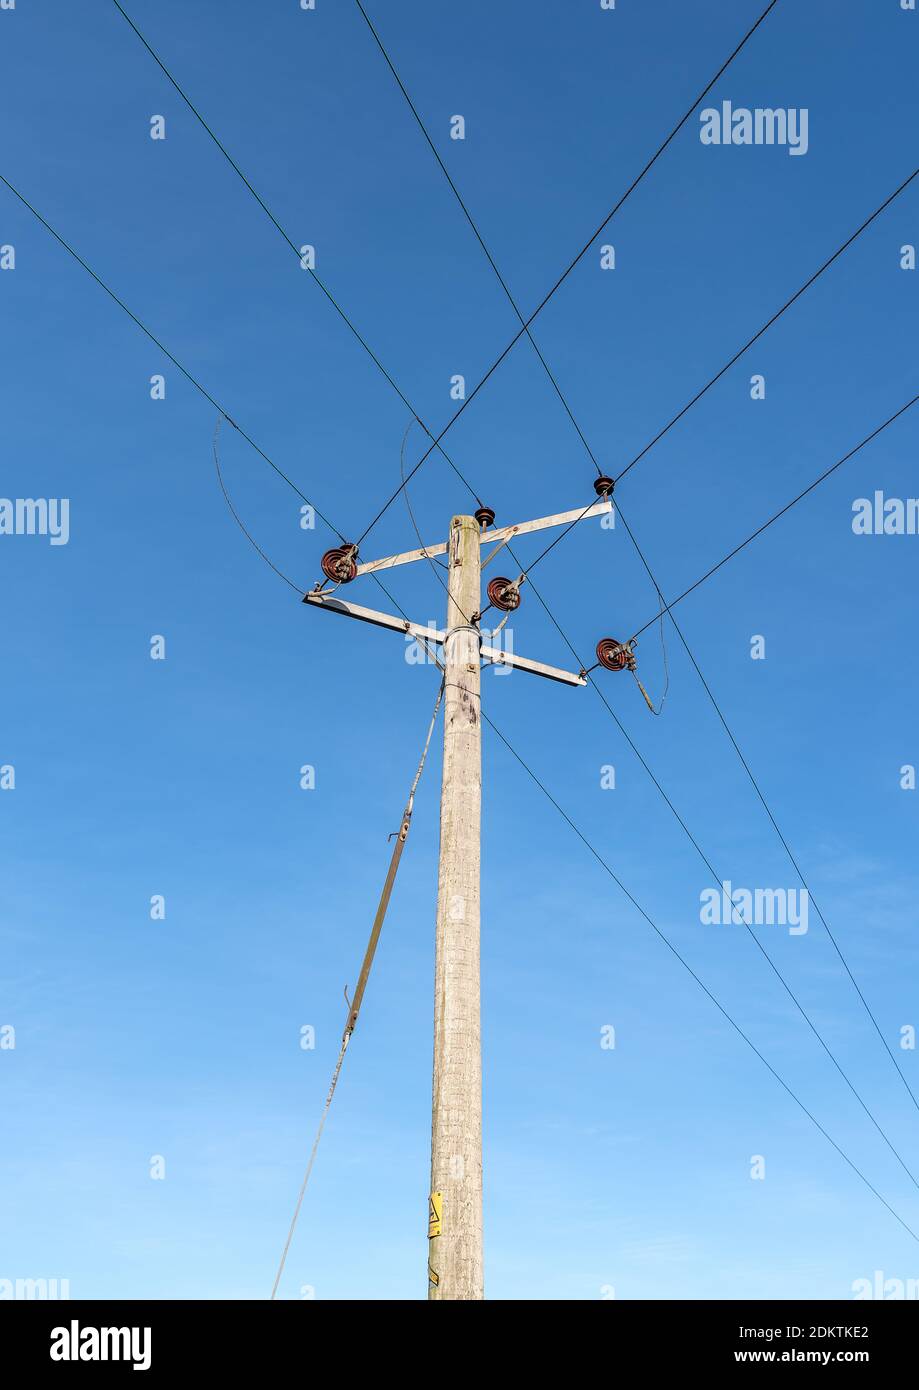 Wooden telegraph poles with wires and insulators against a clear blue sky background Stock Photo